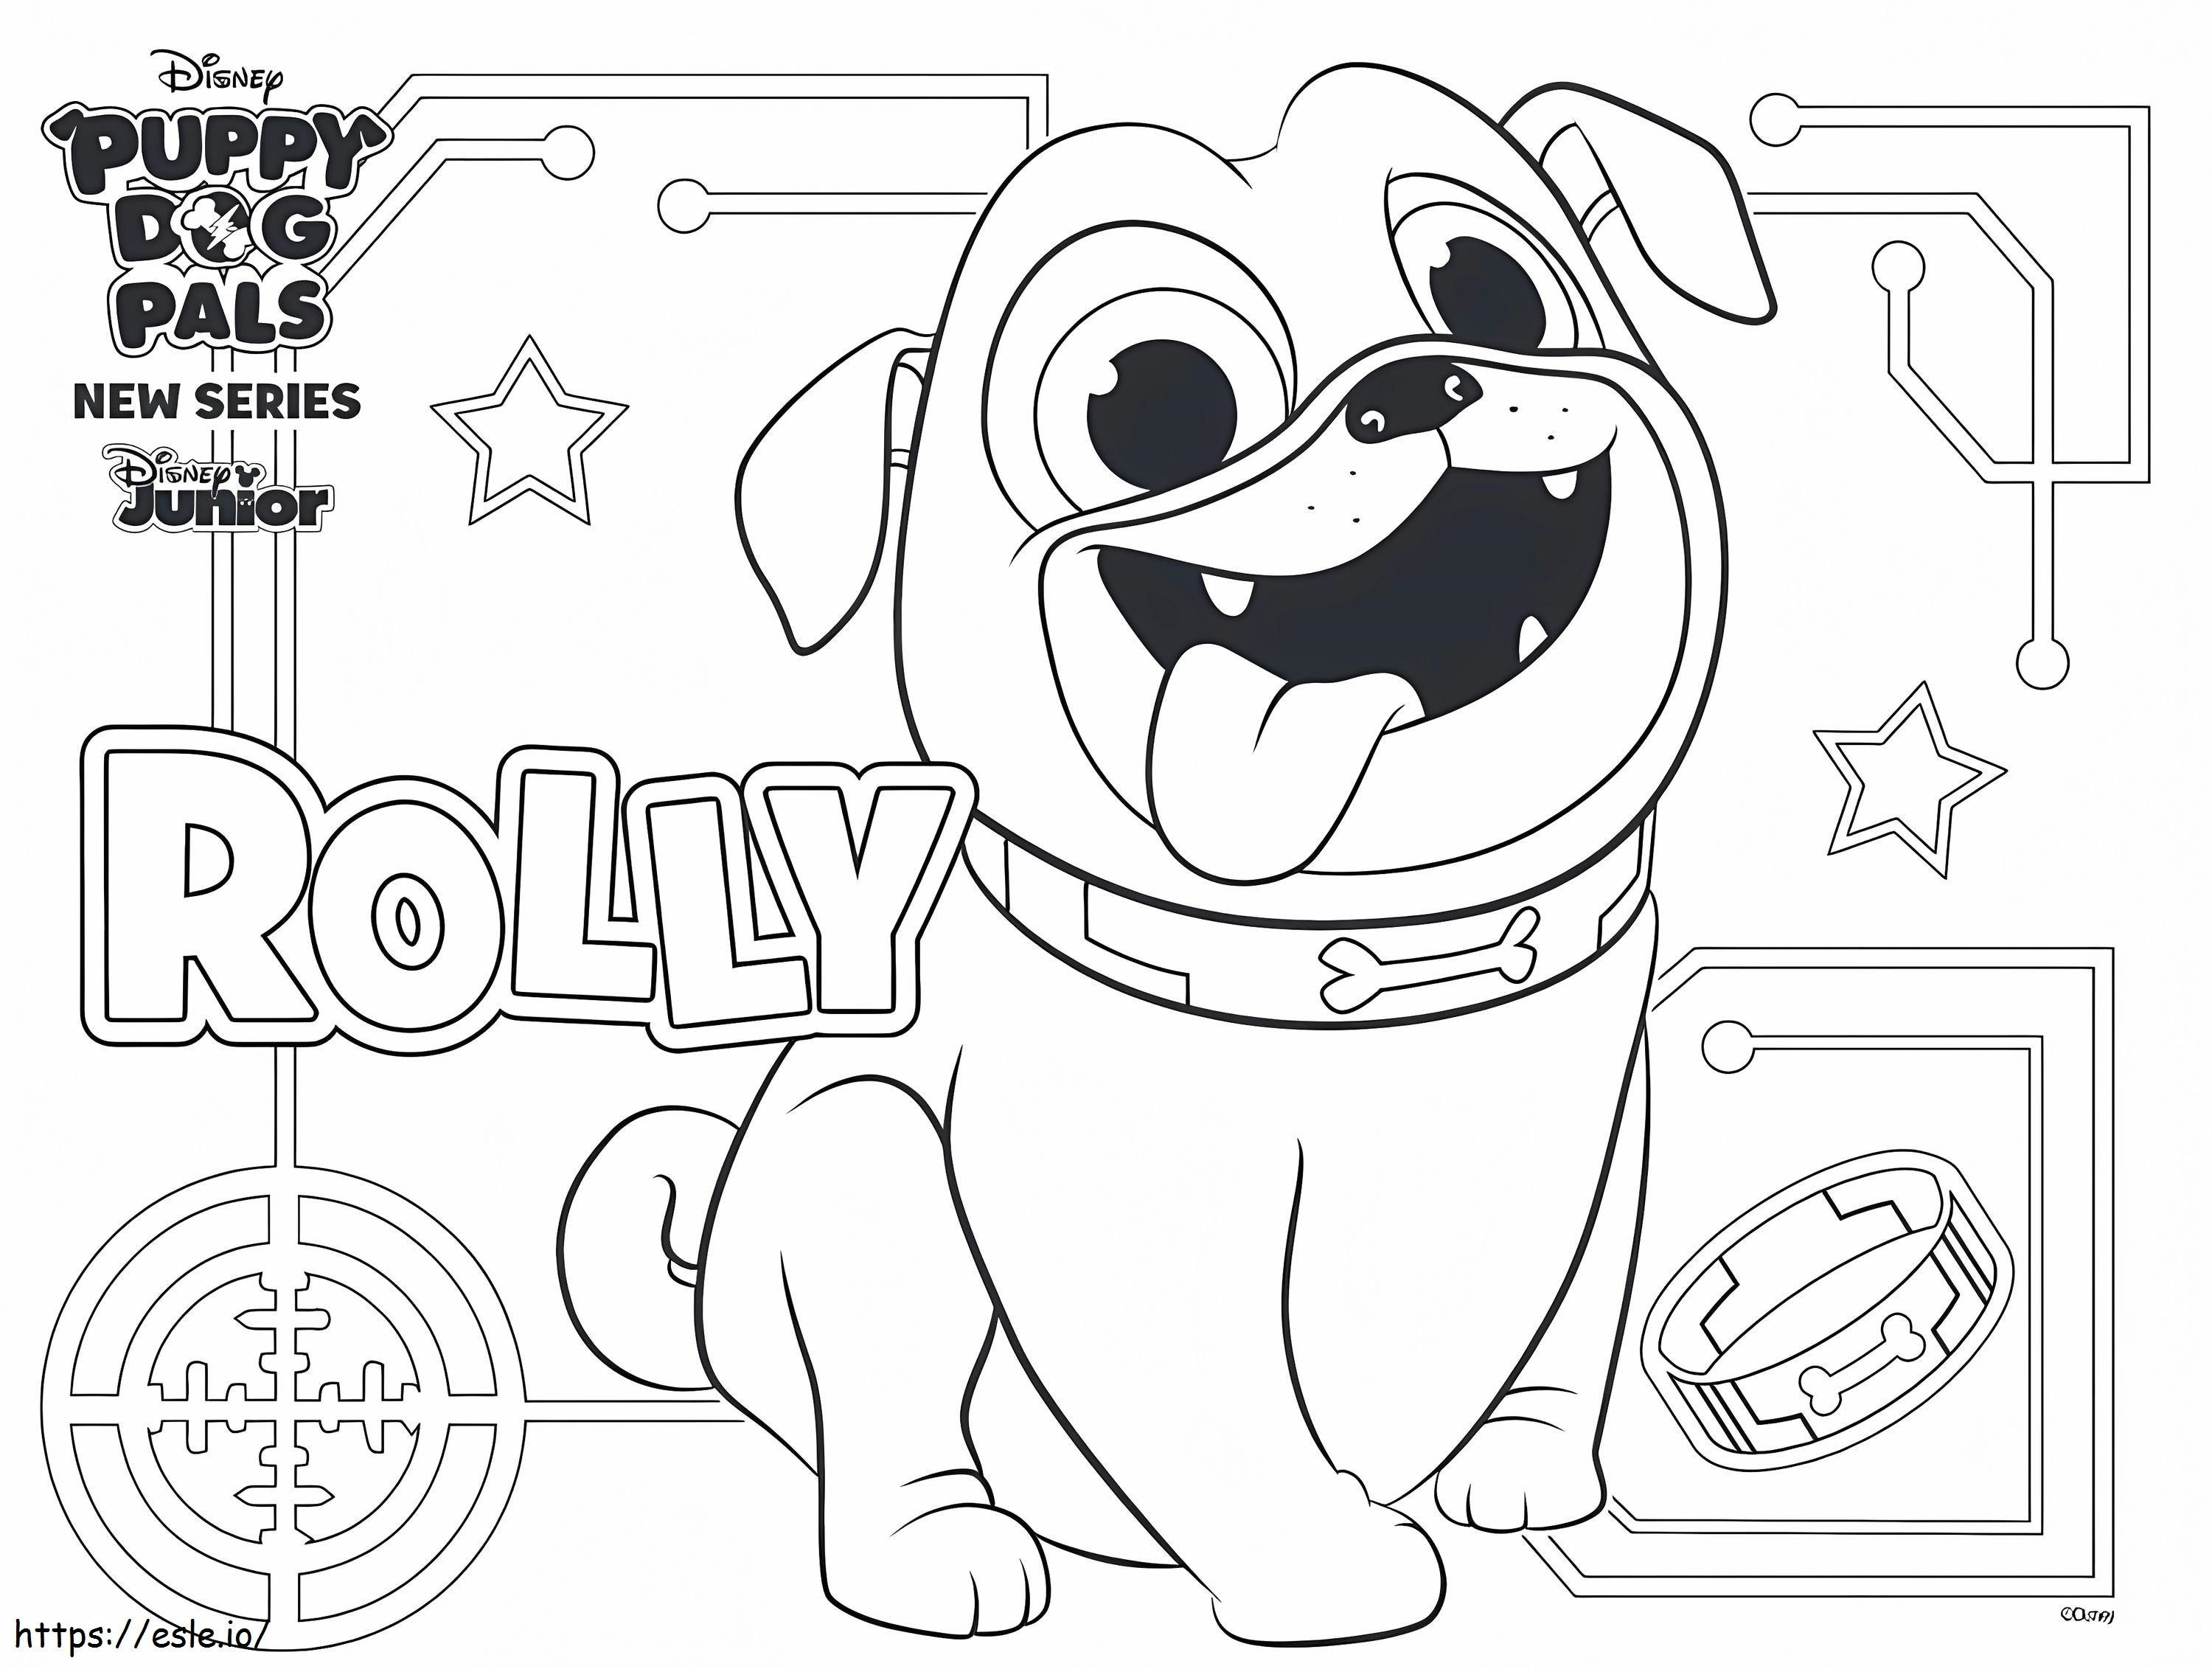 Funny Rolly Coloring Page coloring page